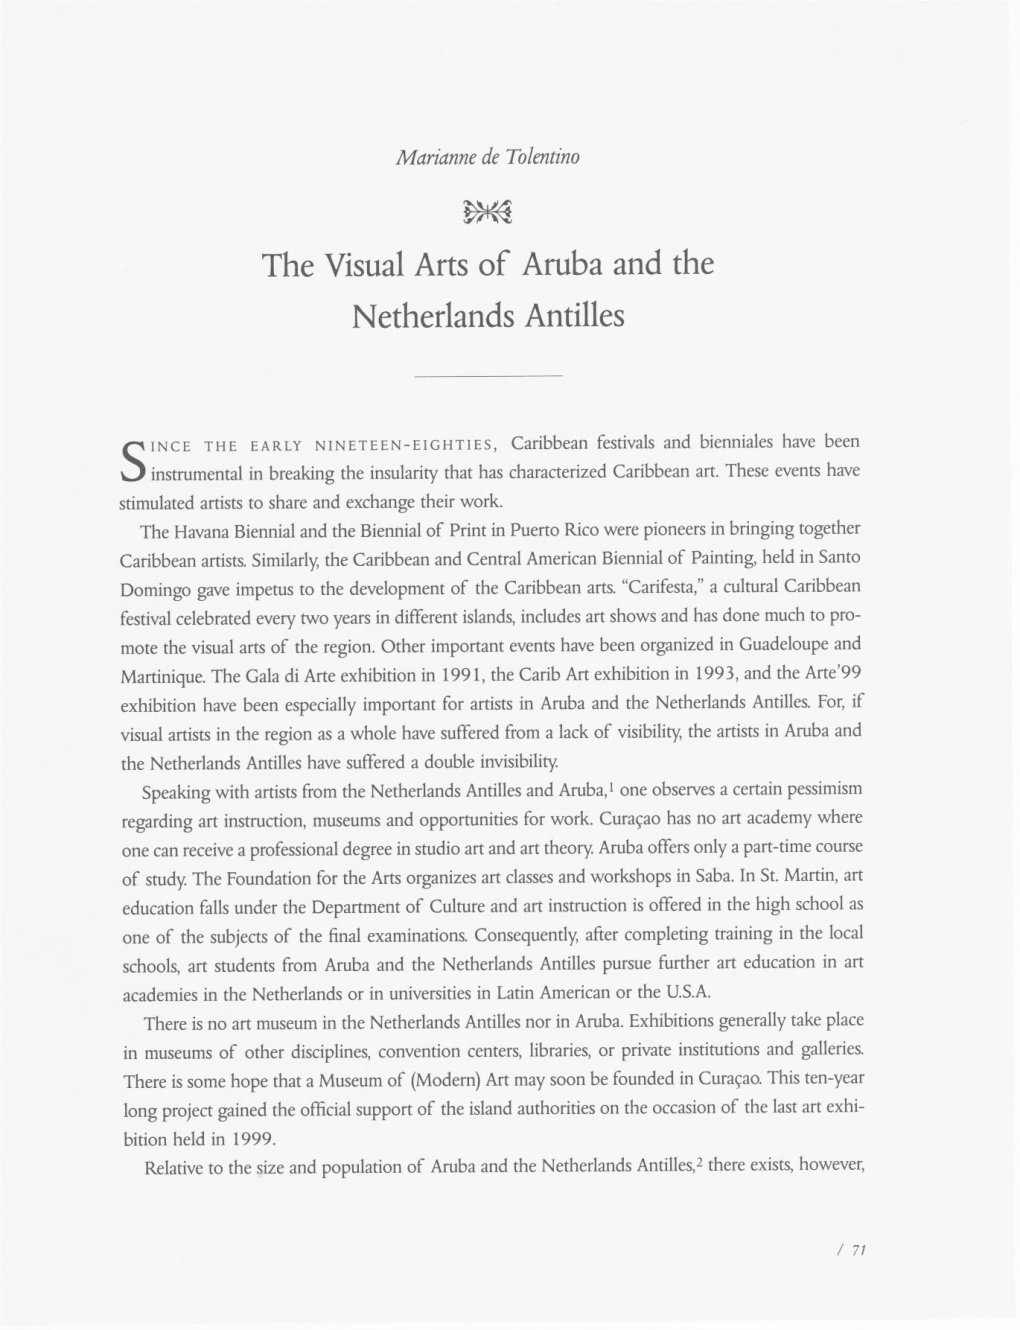 The Visual Arts of Aruba and the Netherlands Antilles